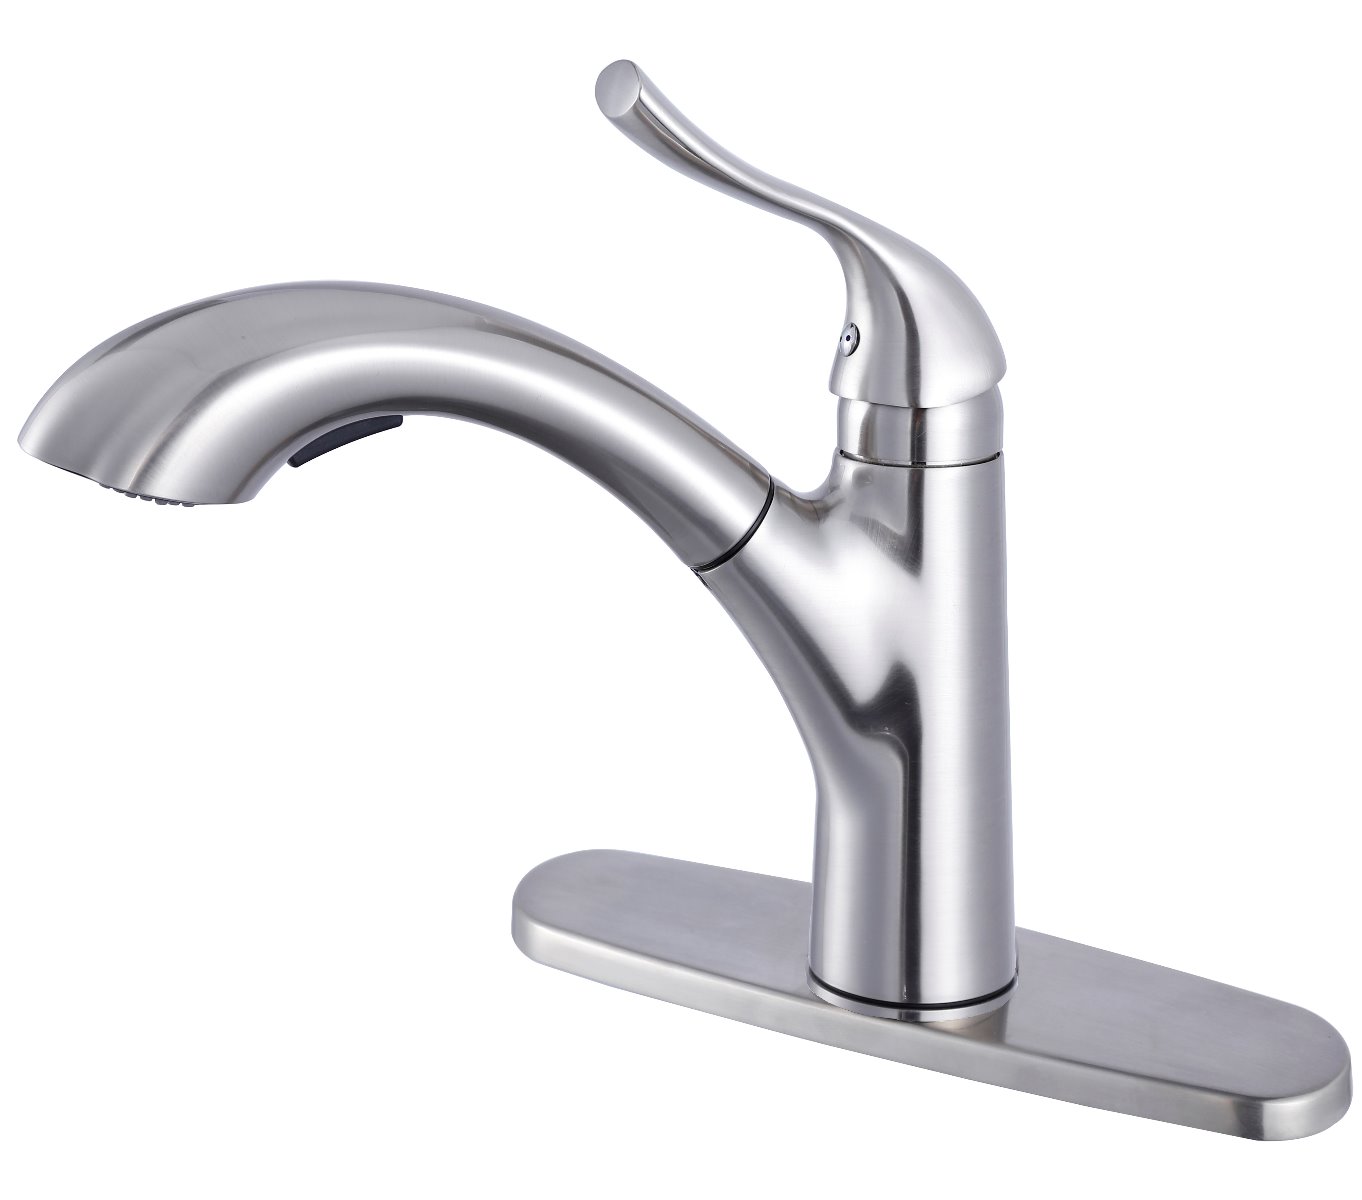 Ratel Pull Out kitchen Faucet 8 11/16